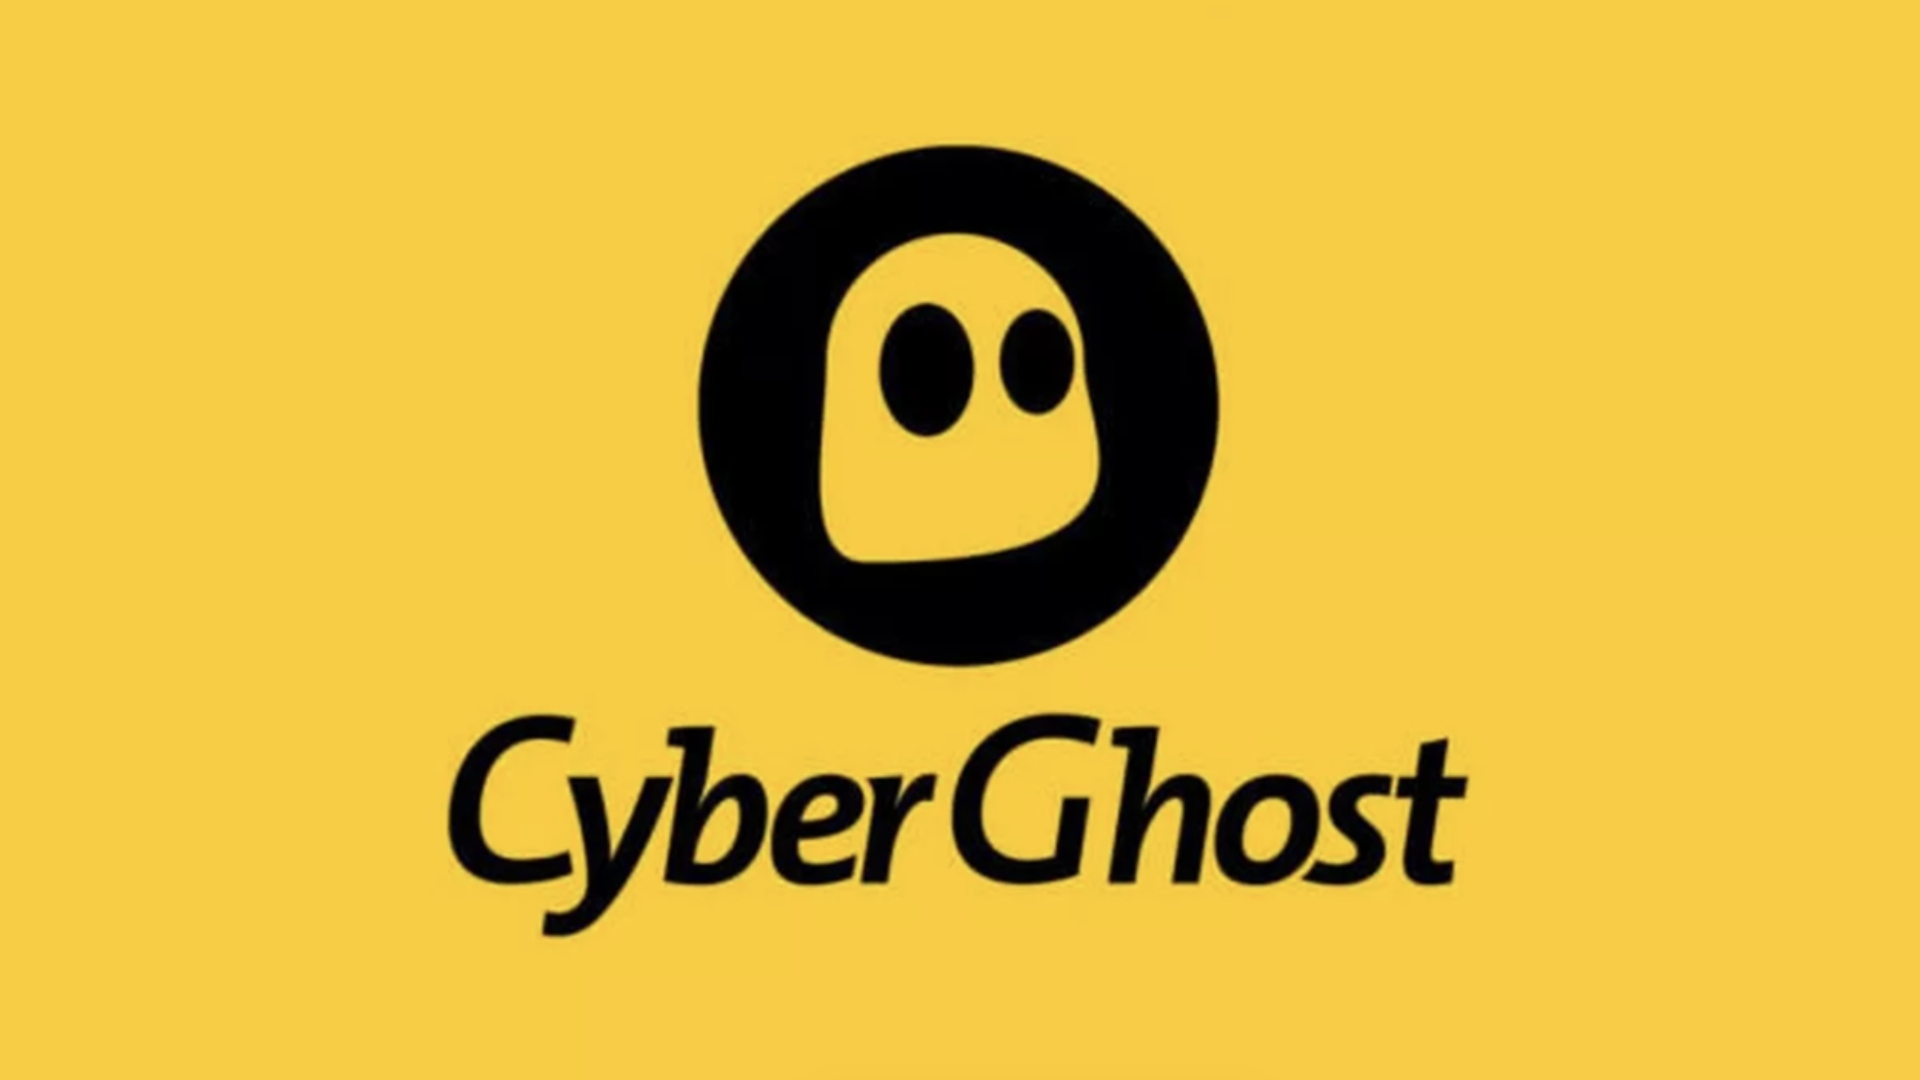 Best Peacock VPN: CyberGhost, Image shows the company logo.